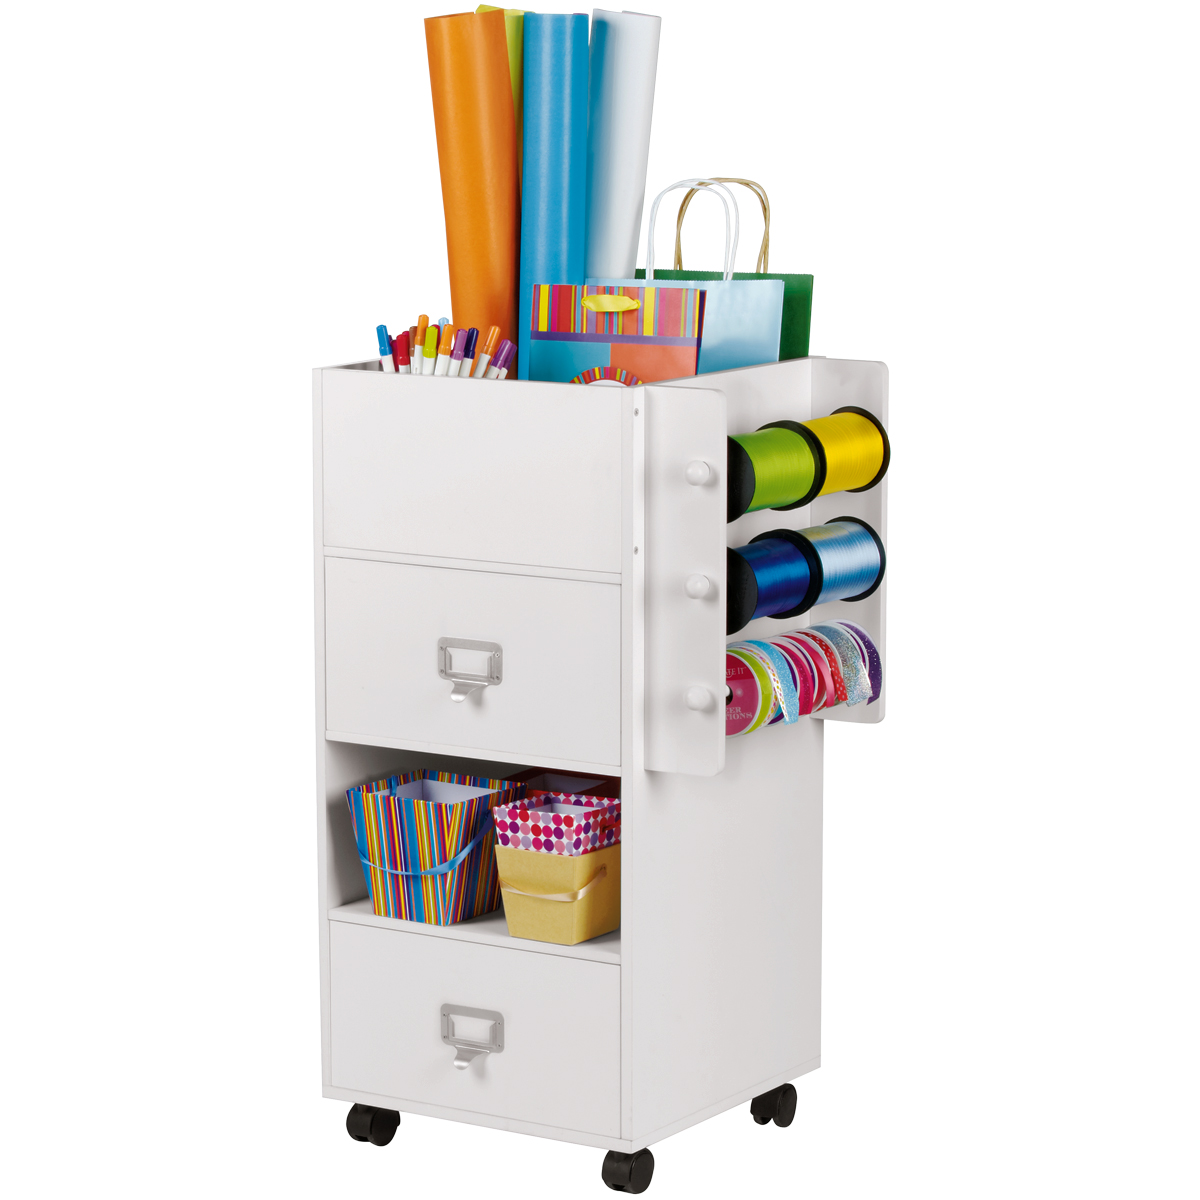 Find the Mobile Craft Storage Center By Ashland® at Michaels